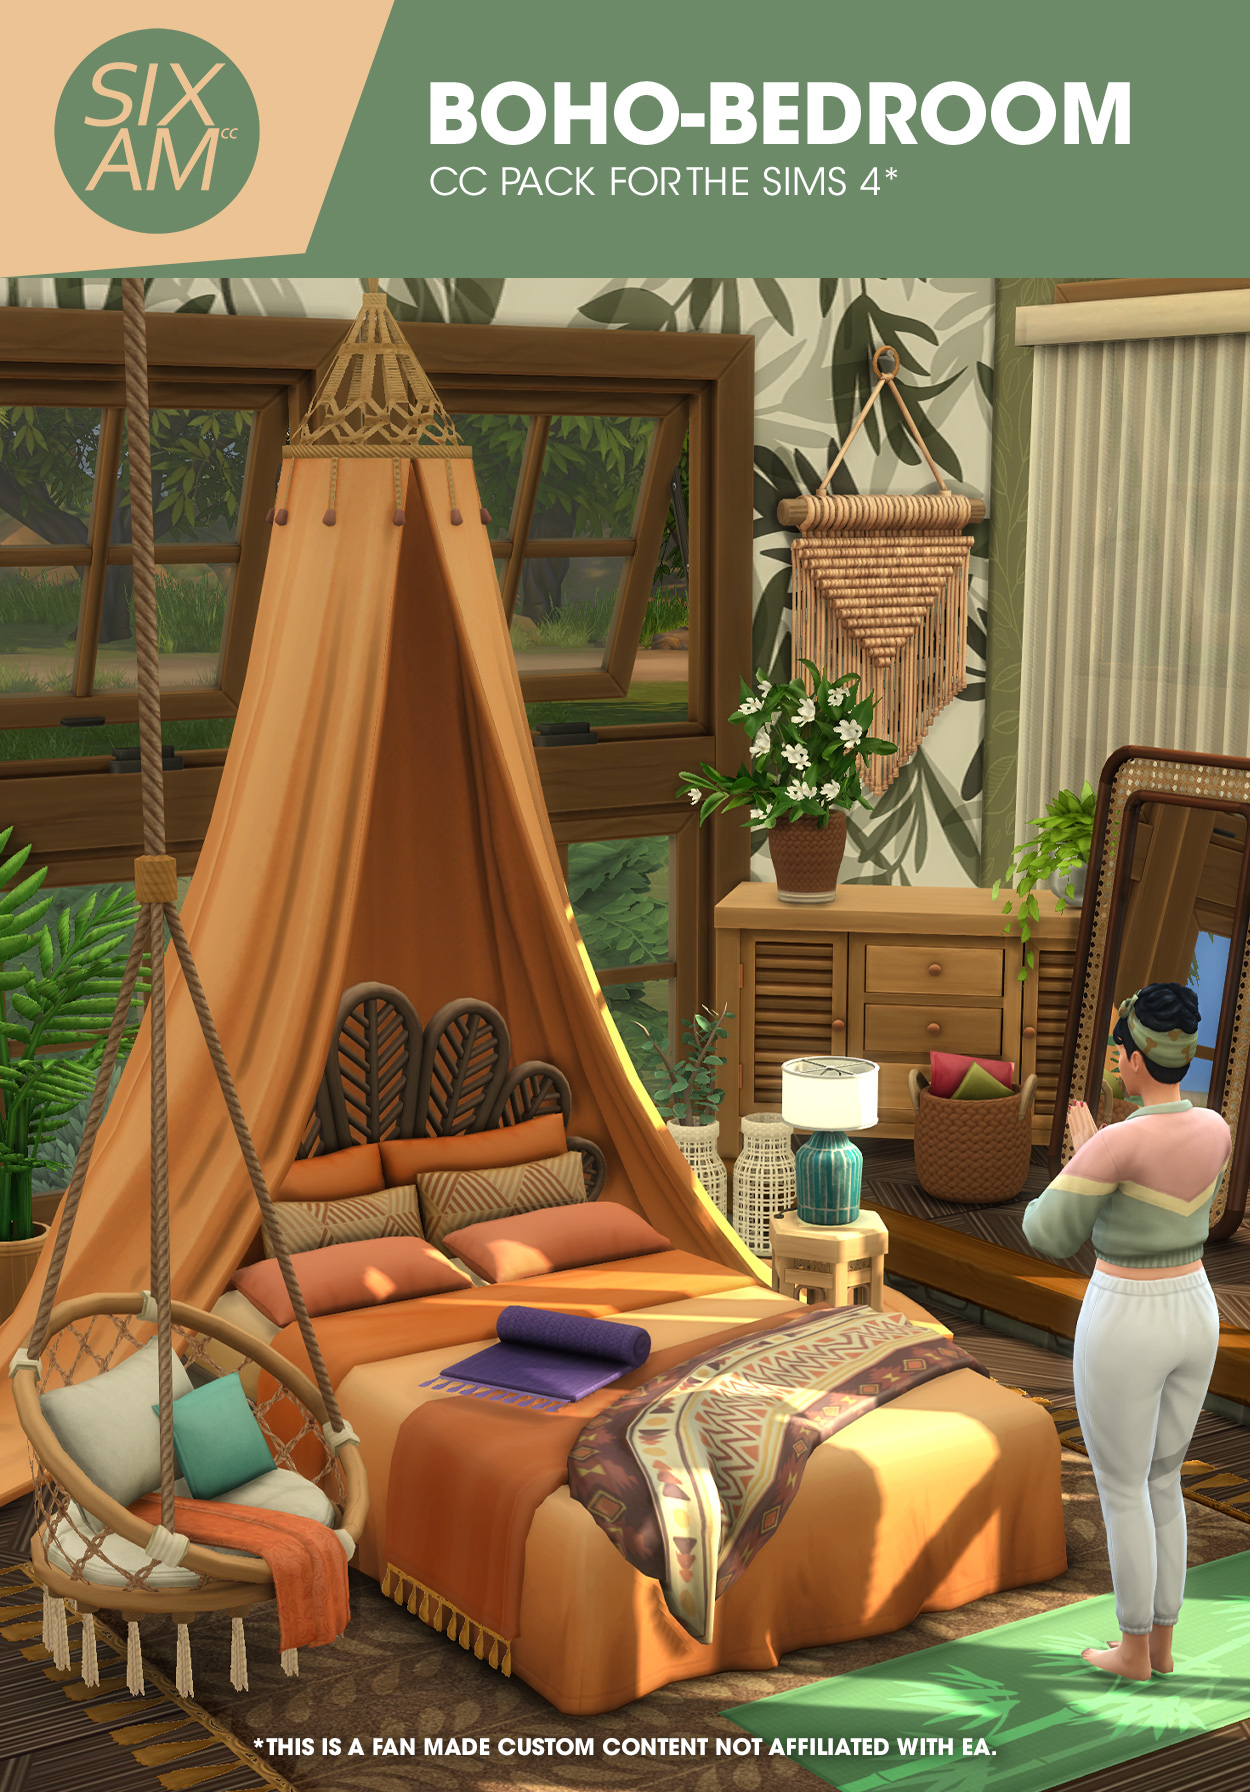 Boho Bedroom Cc Pack For The Sims 4 Sixam Cc